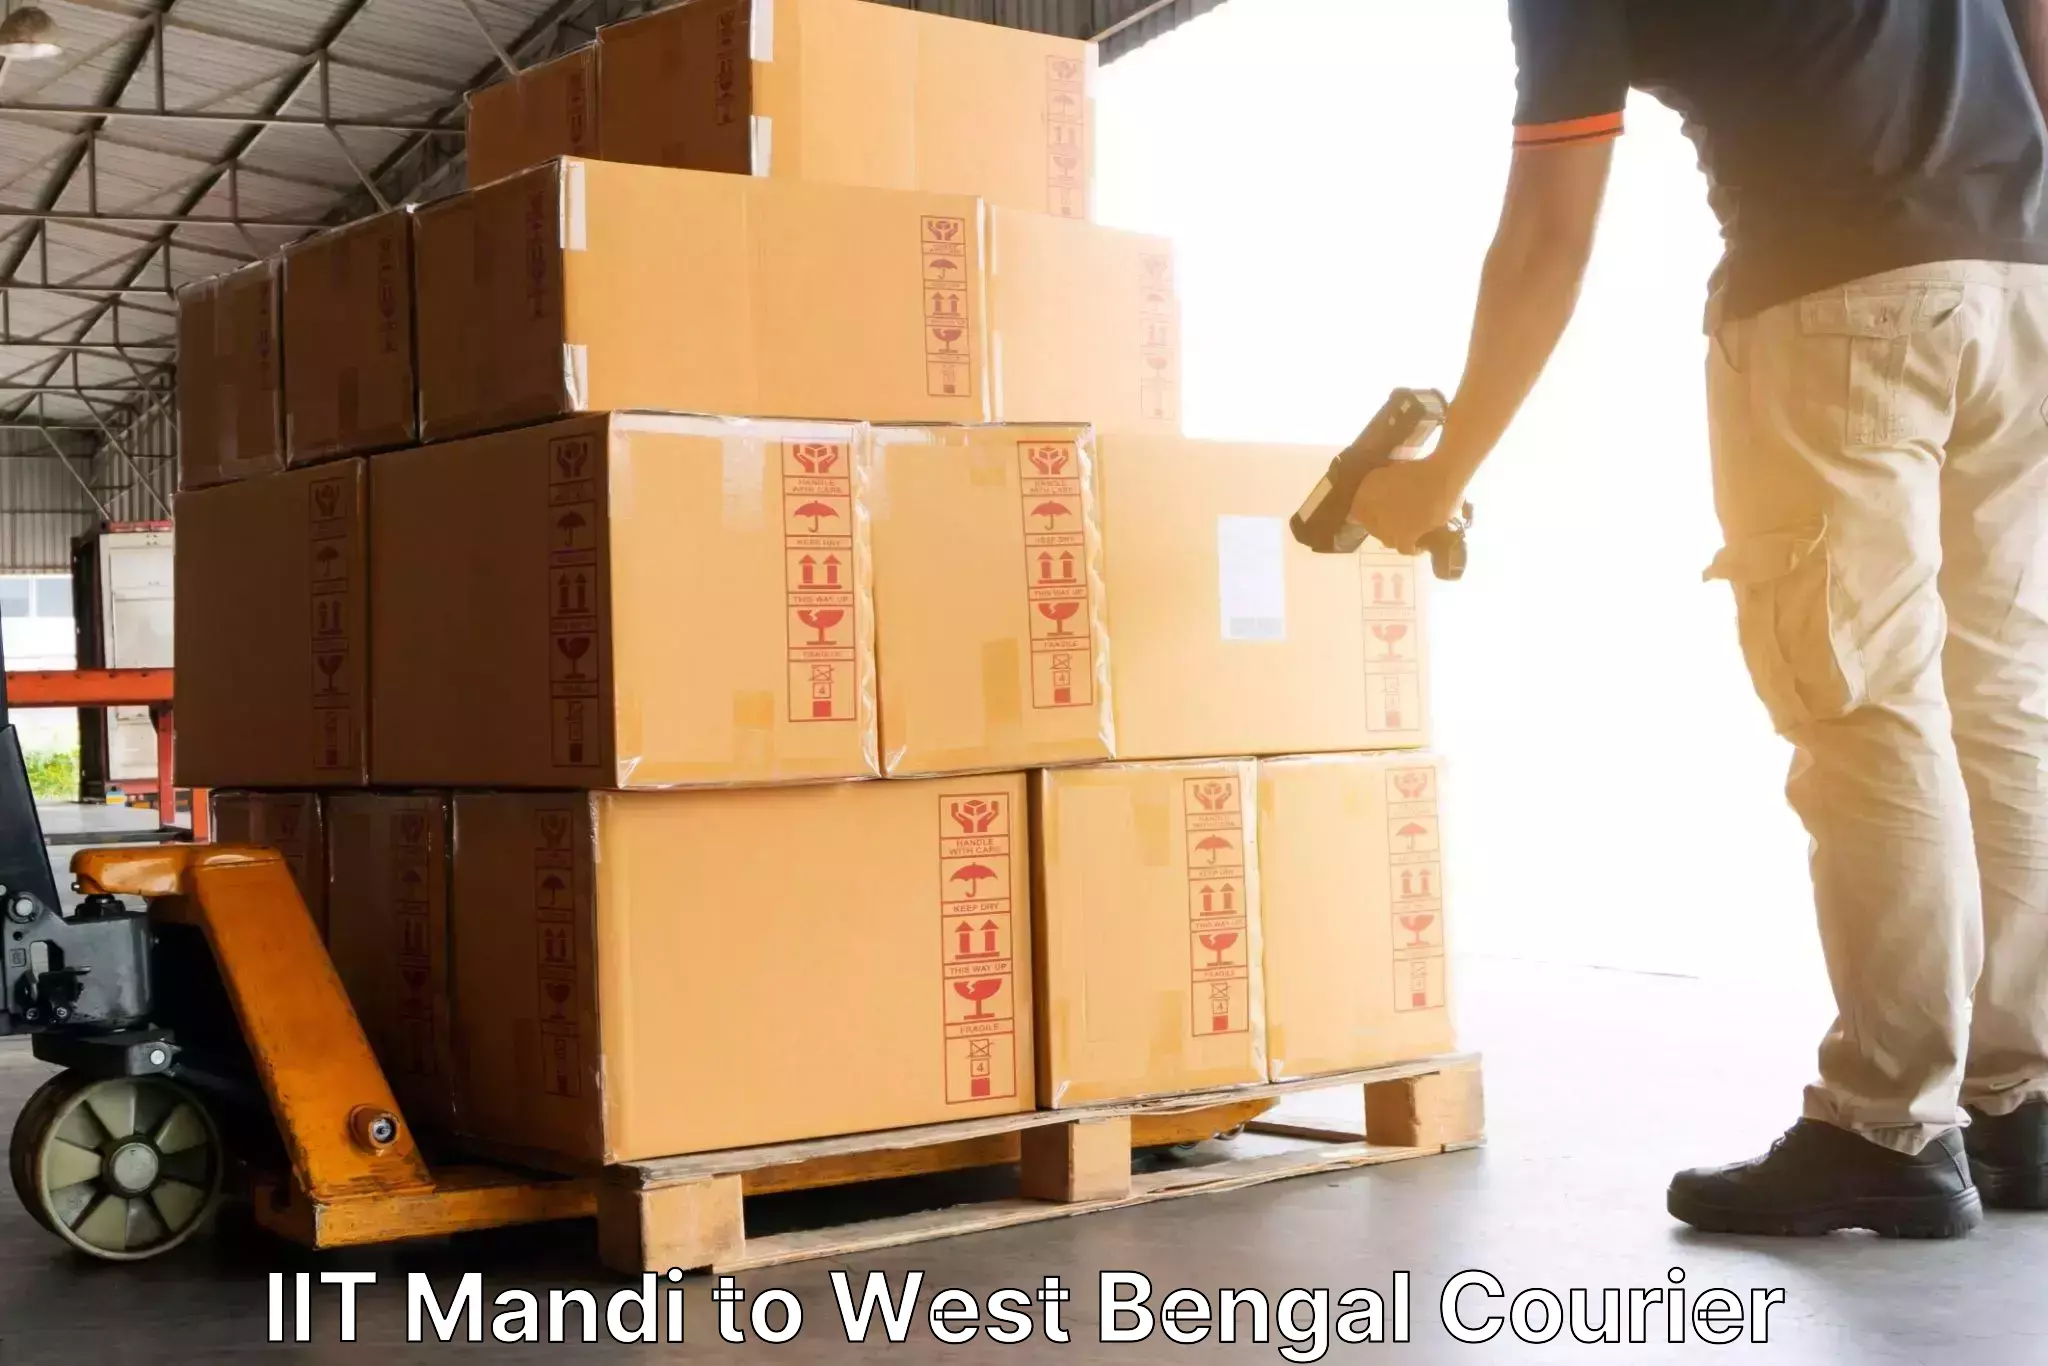 Business delivery service IIT Mandi to West Bengal